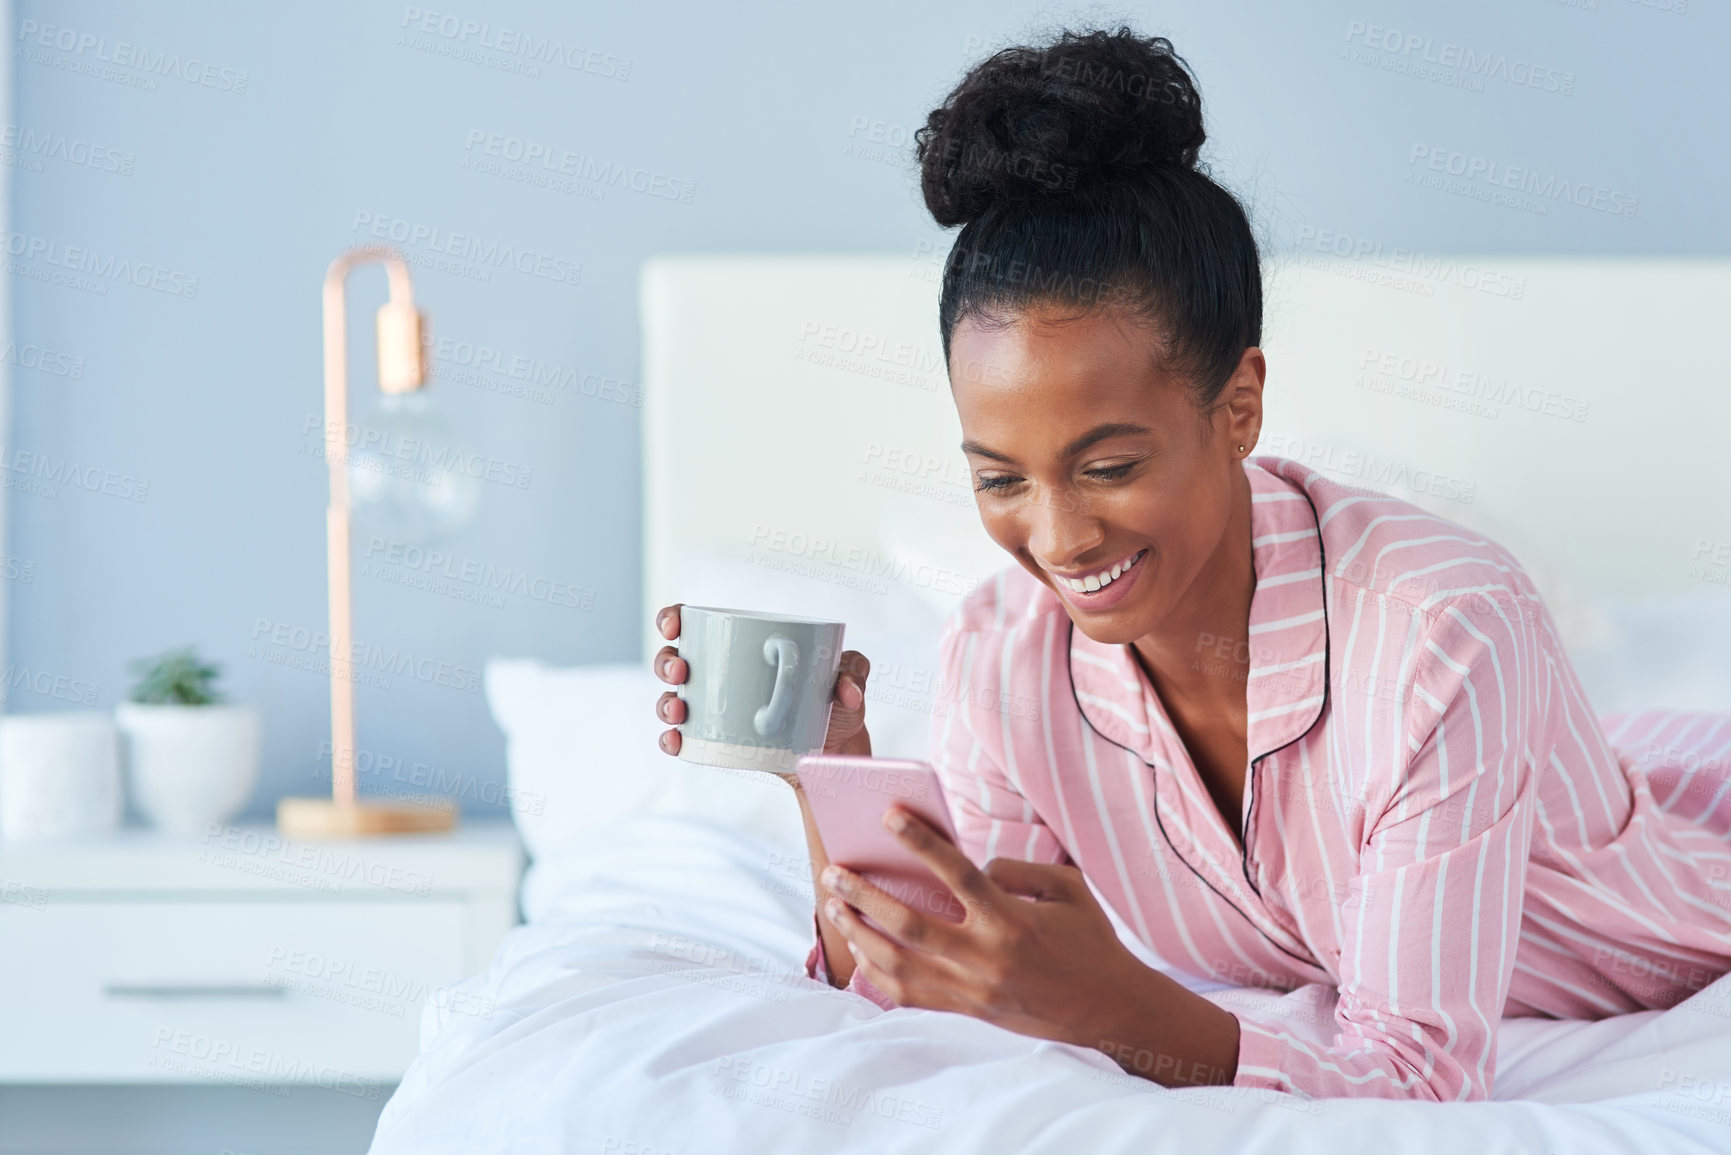 Buy stock photo Shot of an attractive young woman drinking coffee while using her cellphone in bed at home